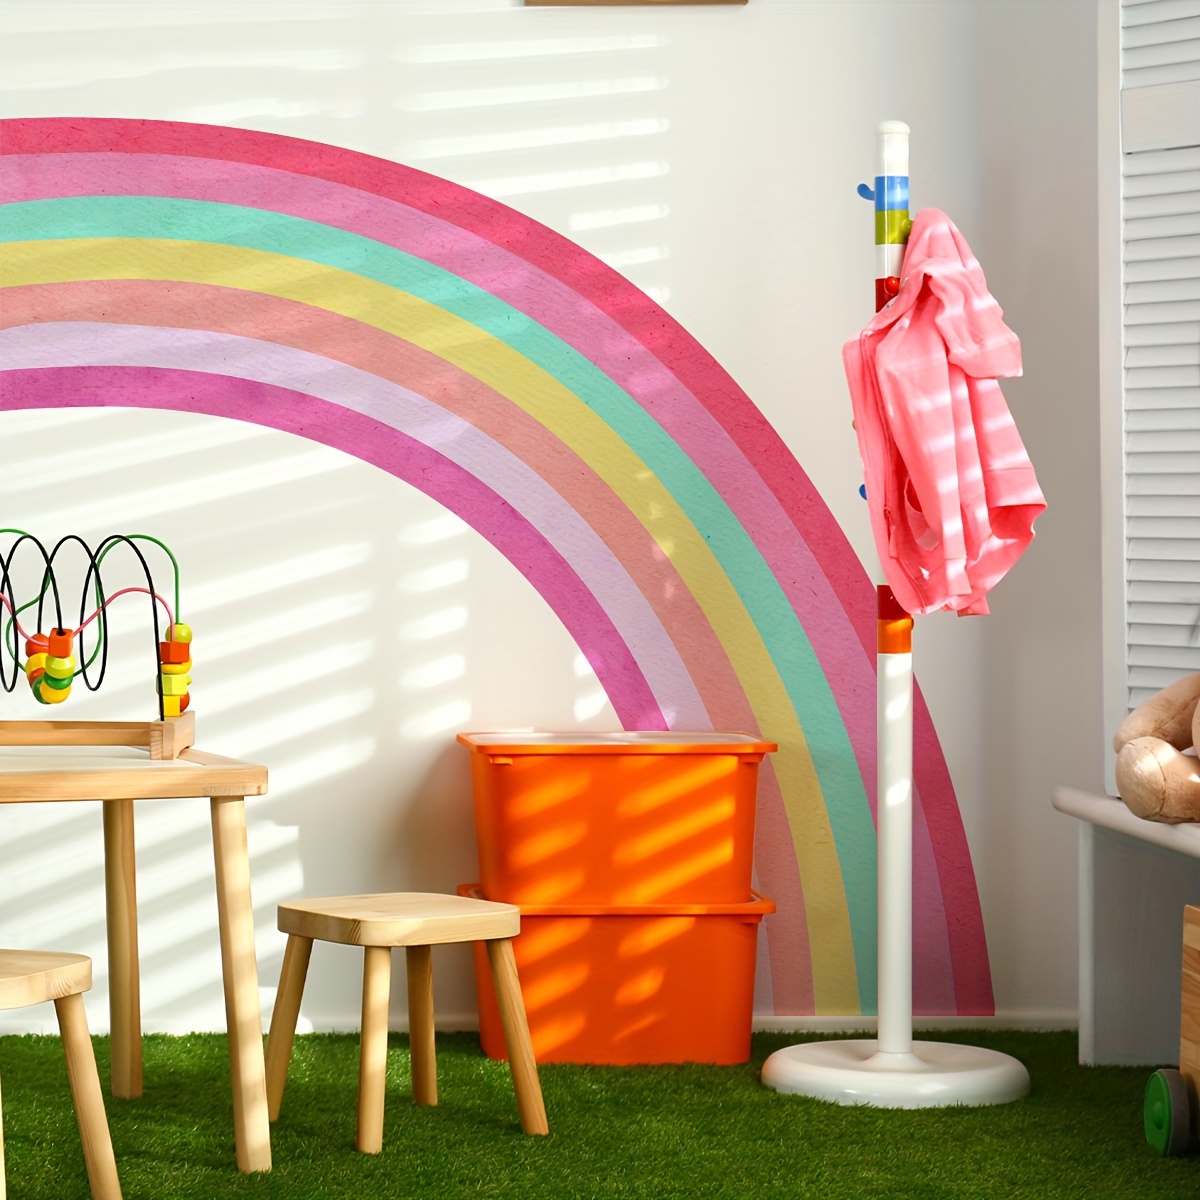 

4pc New Large Rainbow Decorative Wall Stickers, Living Room Background Wall Stickers, Self-adhesive Girl Bedroom Wall Stickers, Beautify Your Home With This Rainbow Sticker